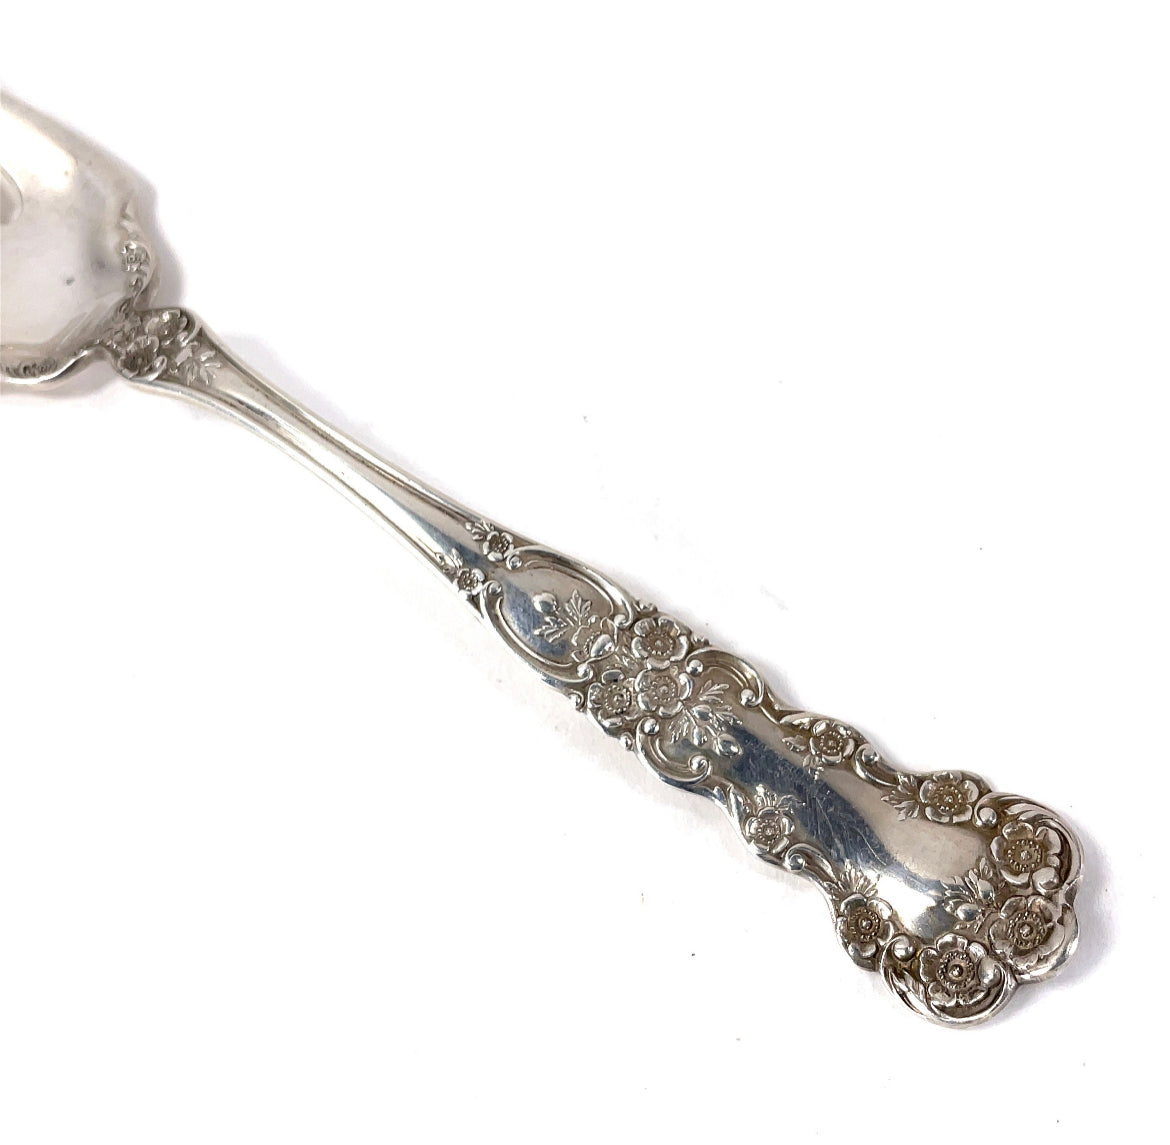 Gorham Buttercup Old Mark Sterling Silver Meat Fork 8 1/8" No Mono